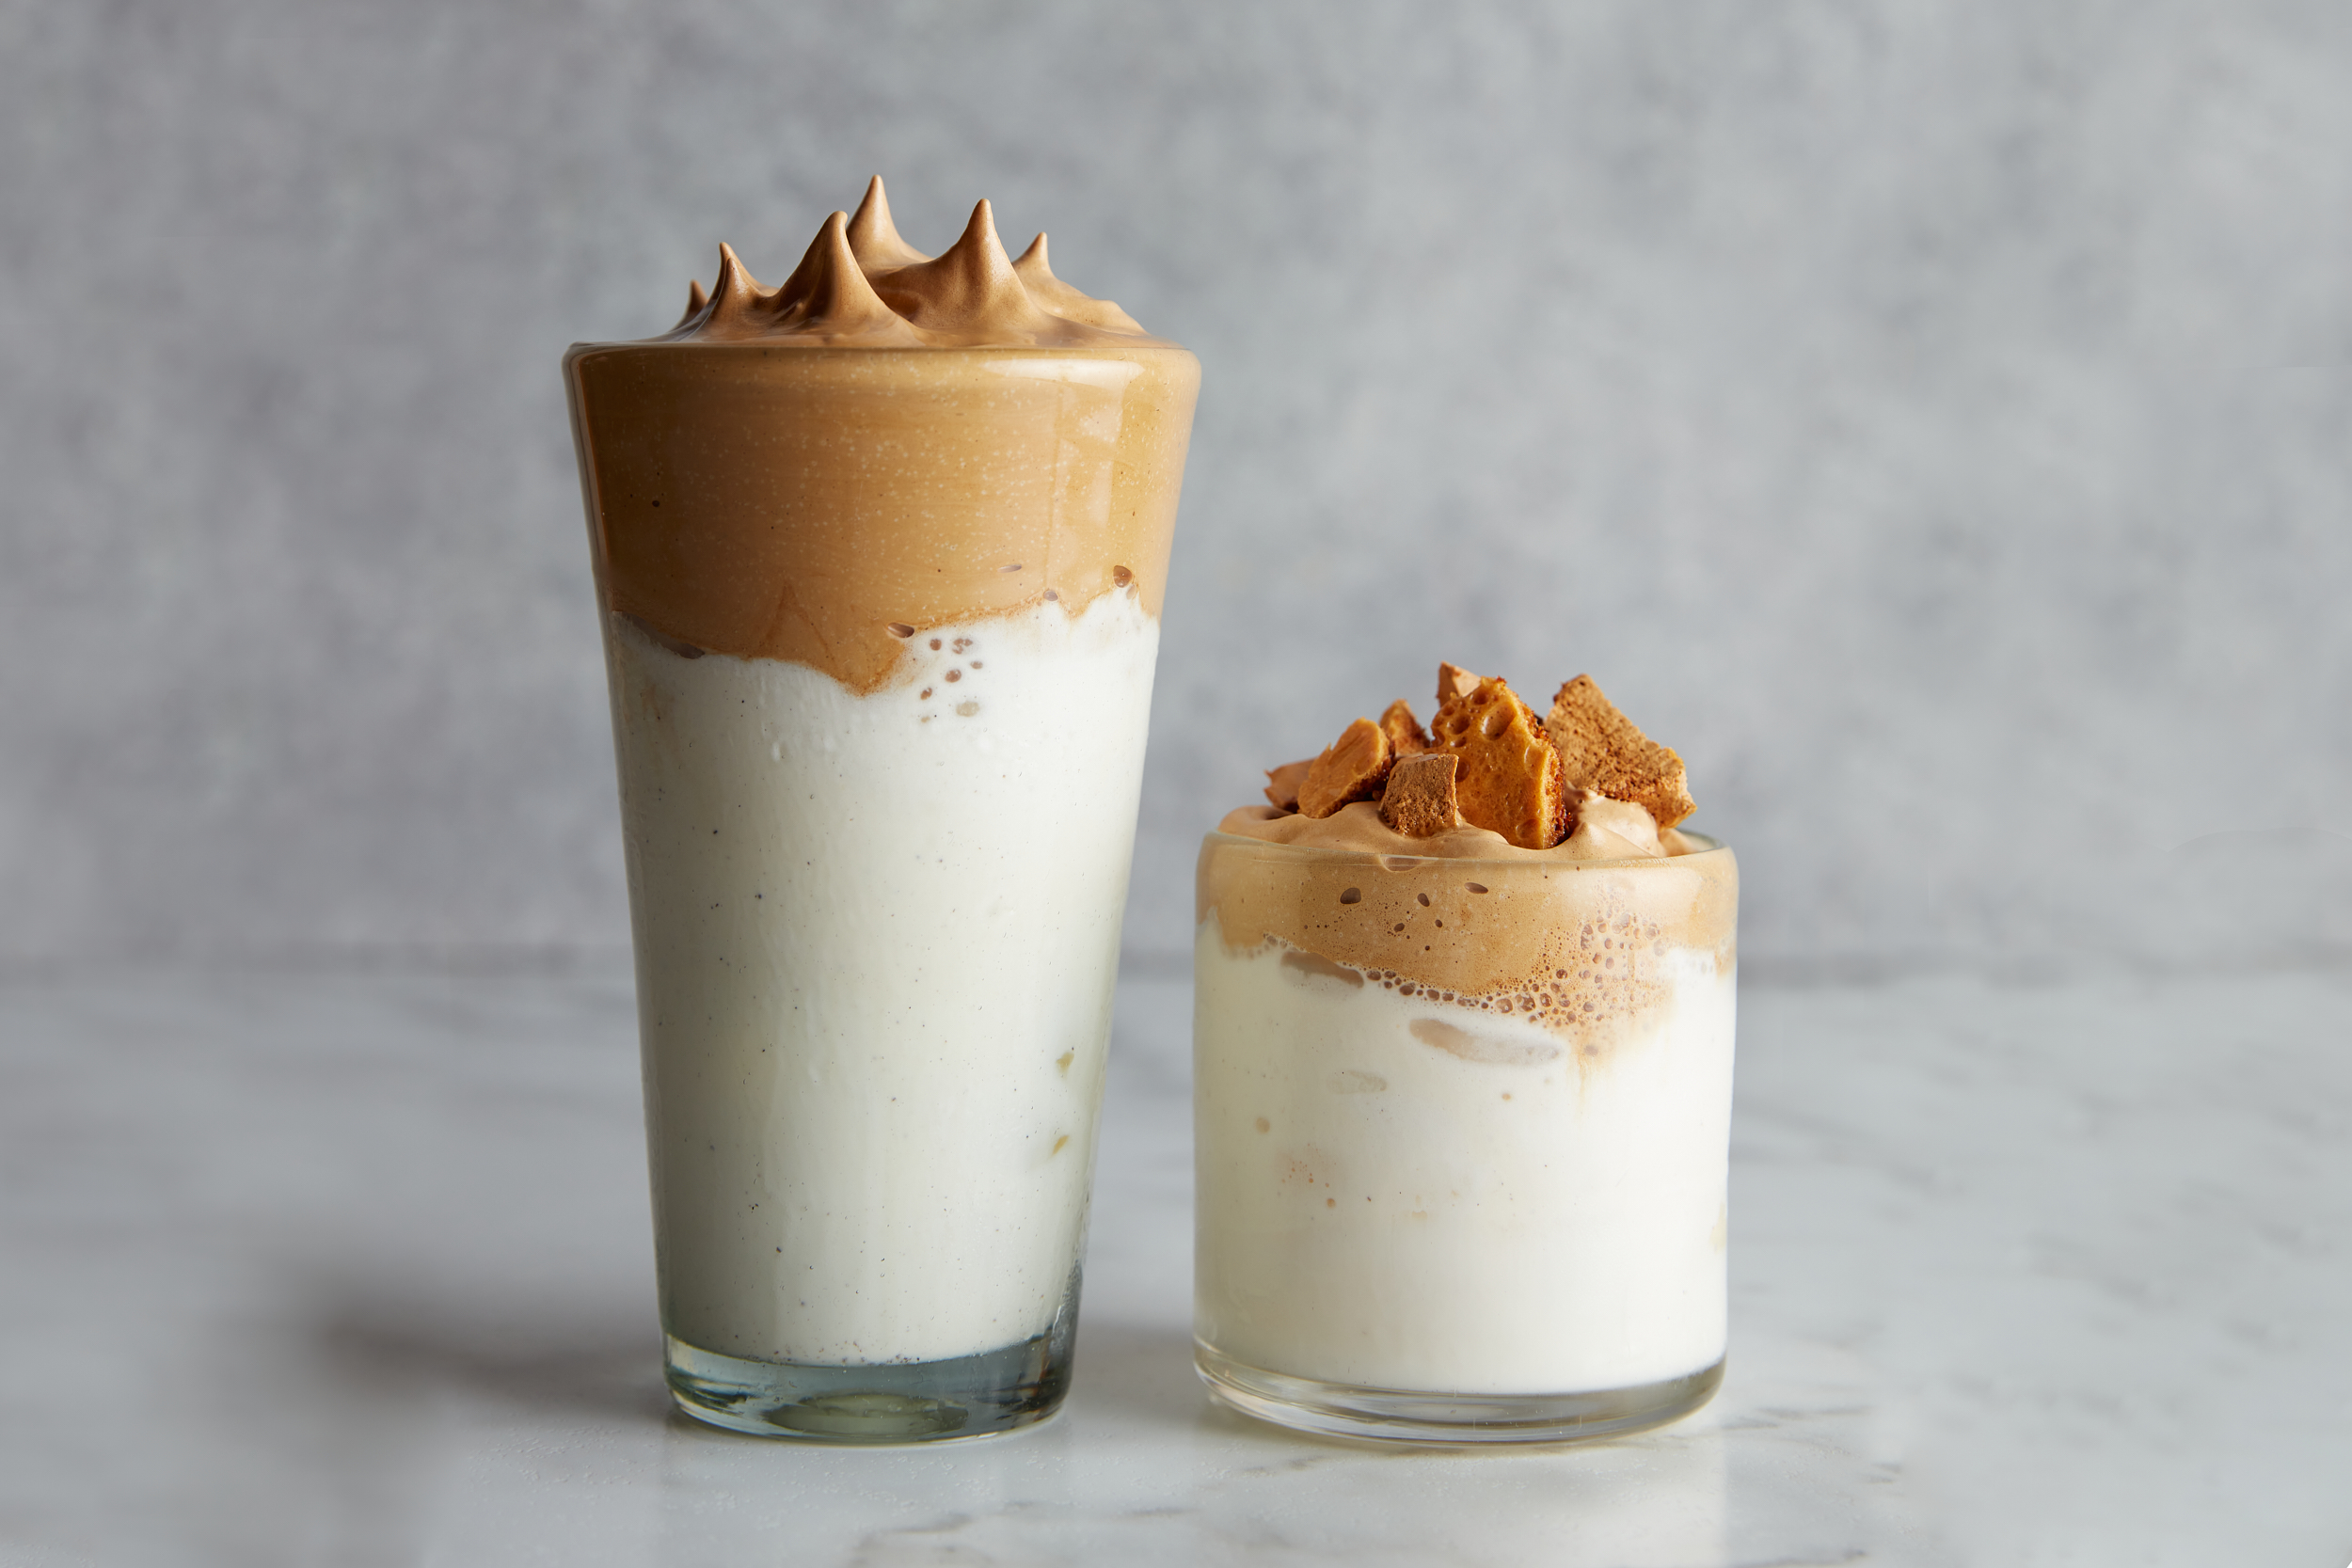 One tall glass and one short glass of dalgona milkshake sit next to each other on a marble surface.